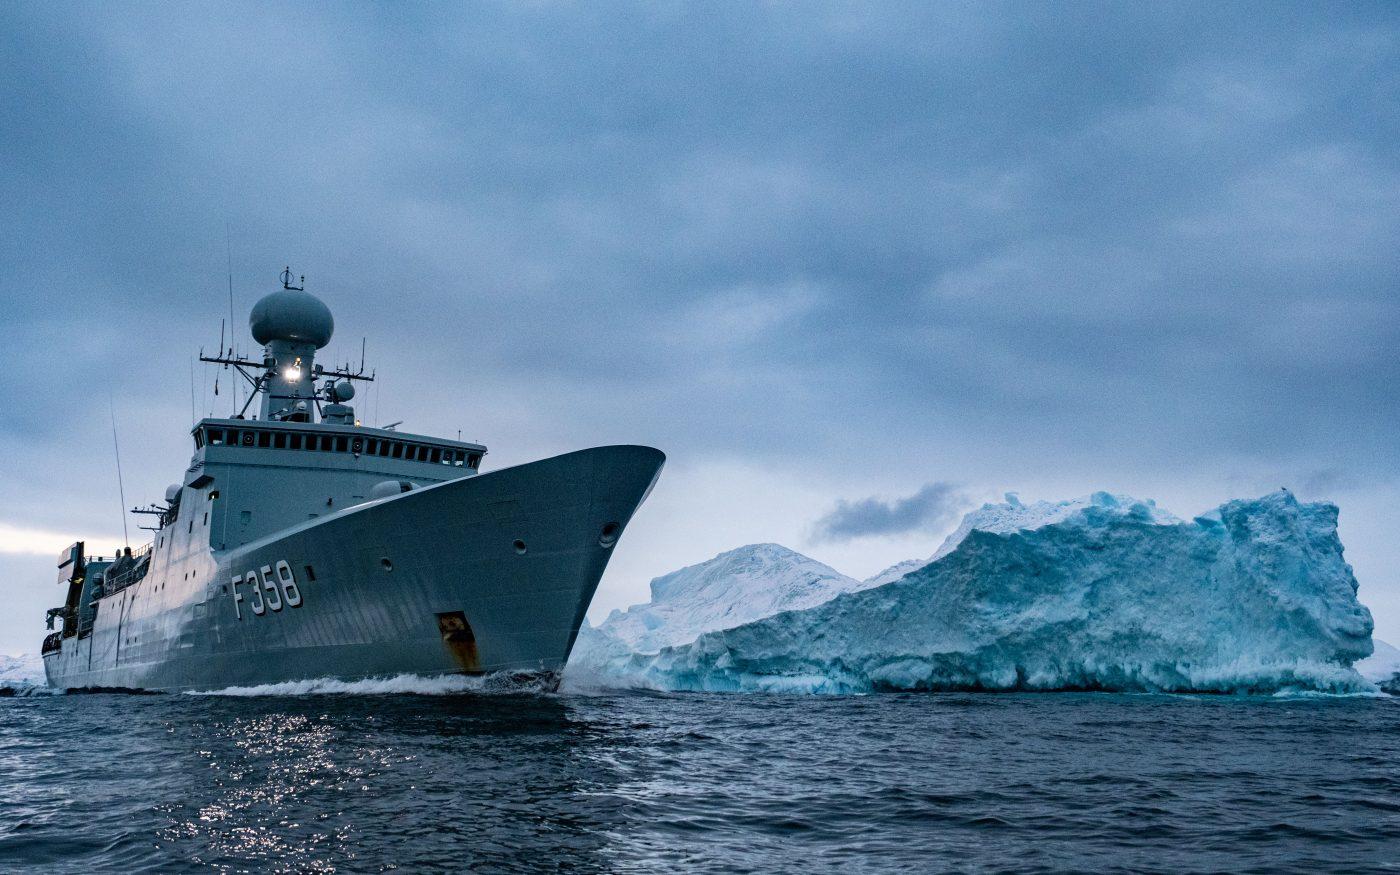 The Royal Danish Navy frigate HDMS Triton is part of Joint Arctic Command Denmark, which is responsible for fisheries control, search-and-rescue and environmental monitoring, and contributes to the security and defence of the High North. © NATO
)